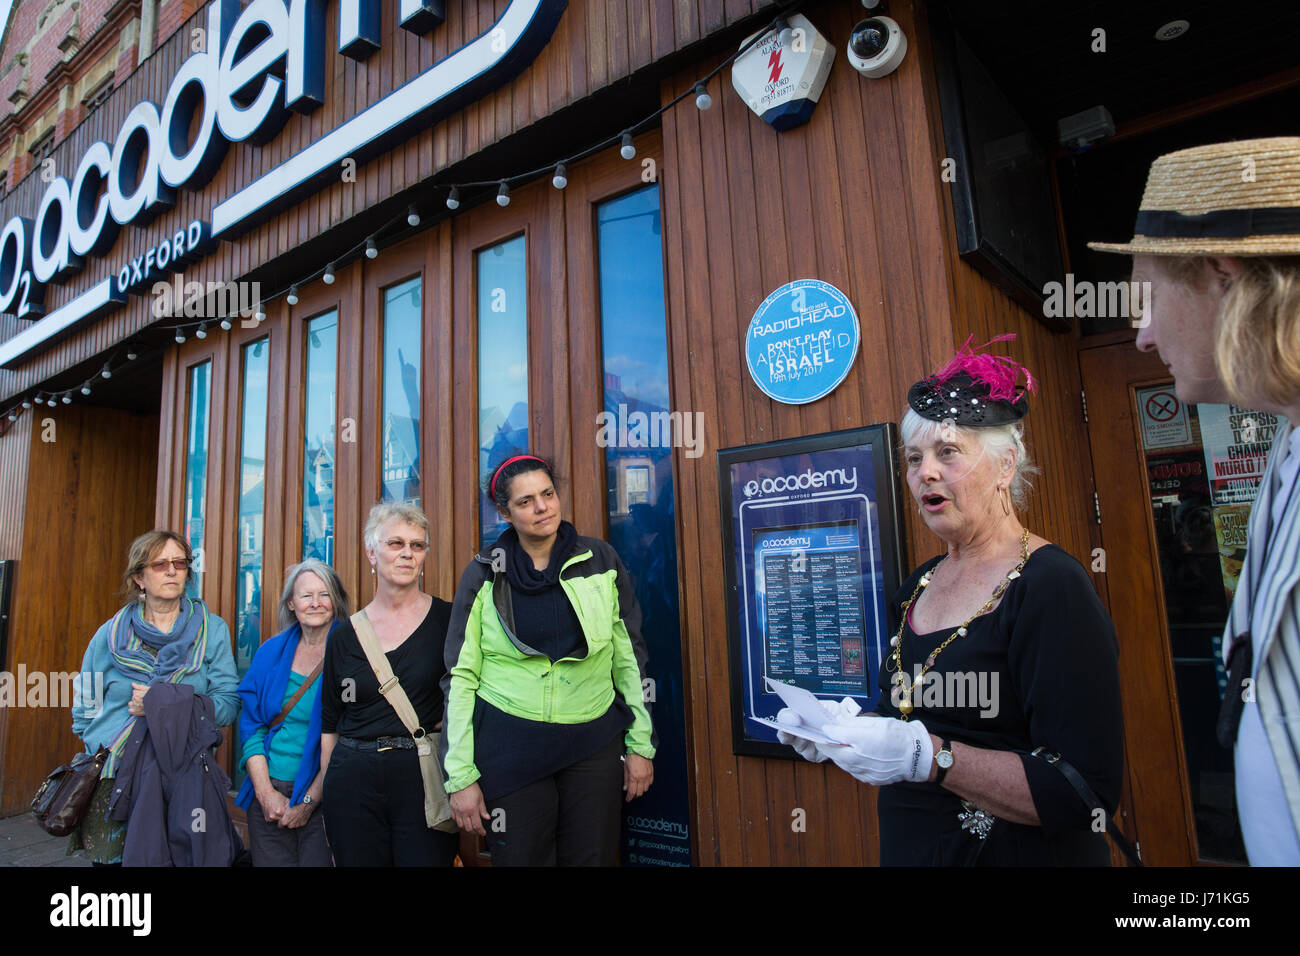 Oxford, UK. 22nd May, 2017. Activists unveil a fake blue plaque outside the O2 Academy Oxford, where Radiohead filmed the video for 'Creep', as part of a protest calling upon the band to cancel a concert in Tel Aviv on 19th July 2017 in support of the cultural boycott called by Palestinian organisations as part of the BDS (Boycott, Divestment and Sanctions) campaign. There are many historical links between Radiohead and the city of Oxford. Credit: Mark Kerrison/Alamy Live News Stock Photo